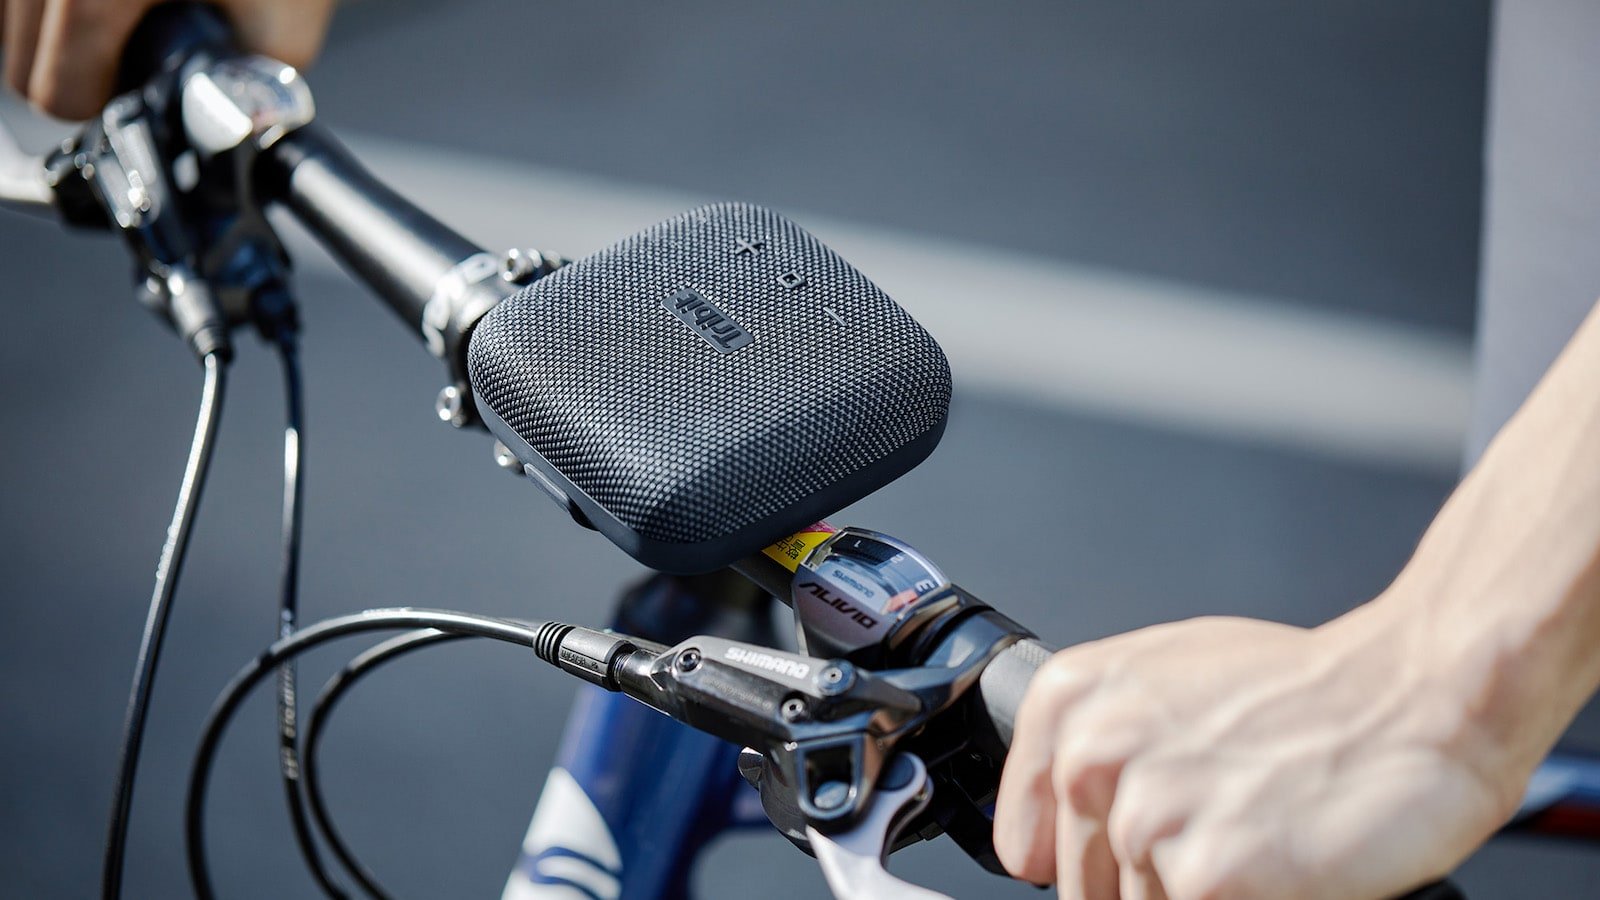 Tribit StormBox Micro speaker has a tear-resistant strap to attach it to your bike